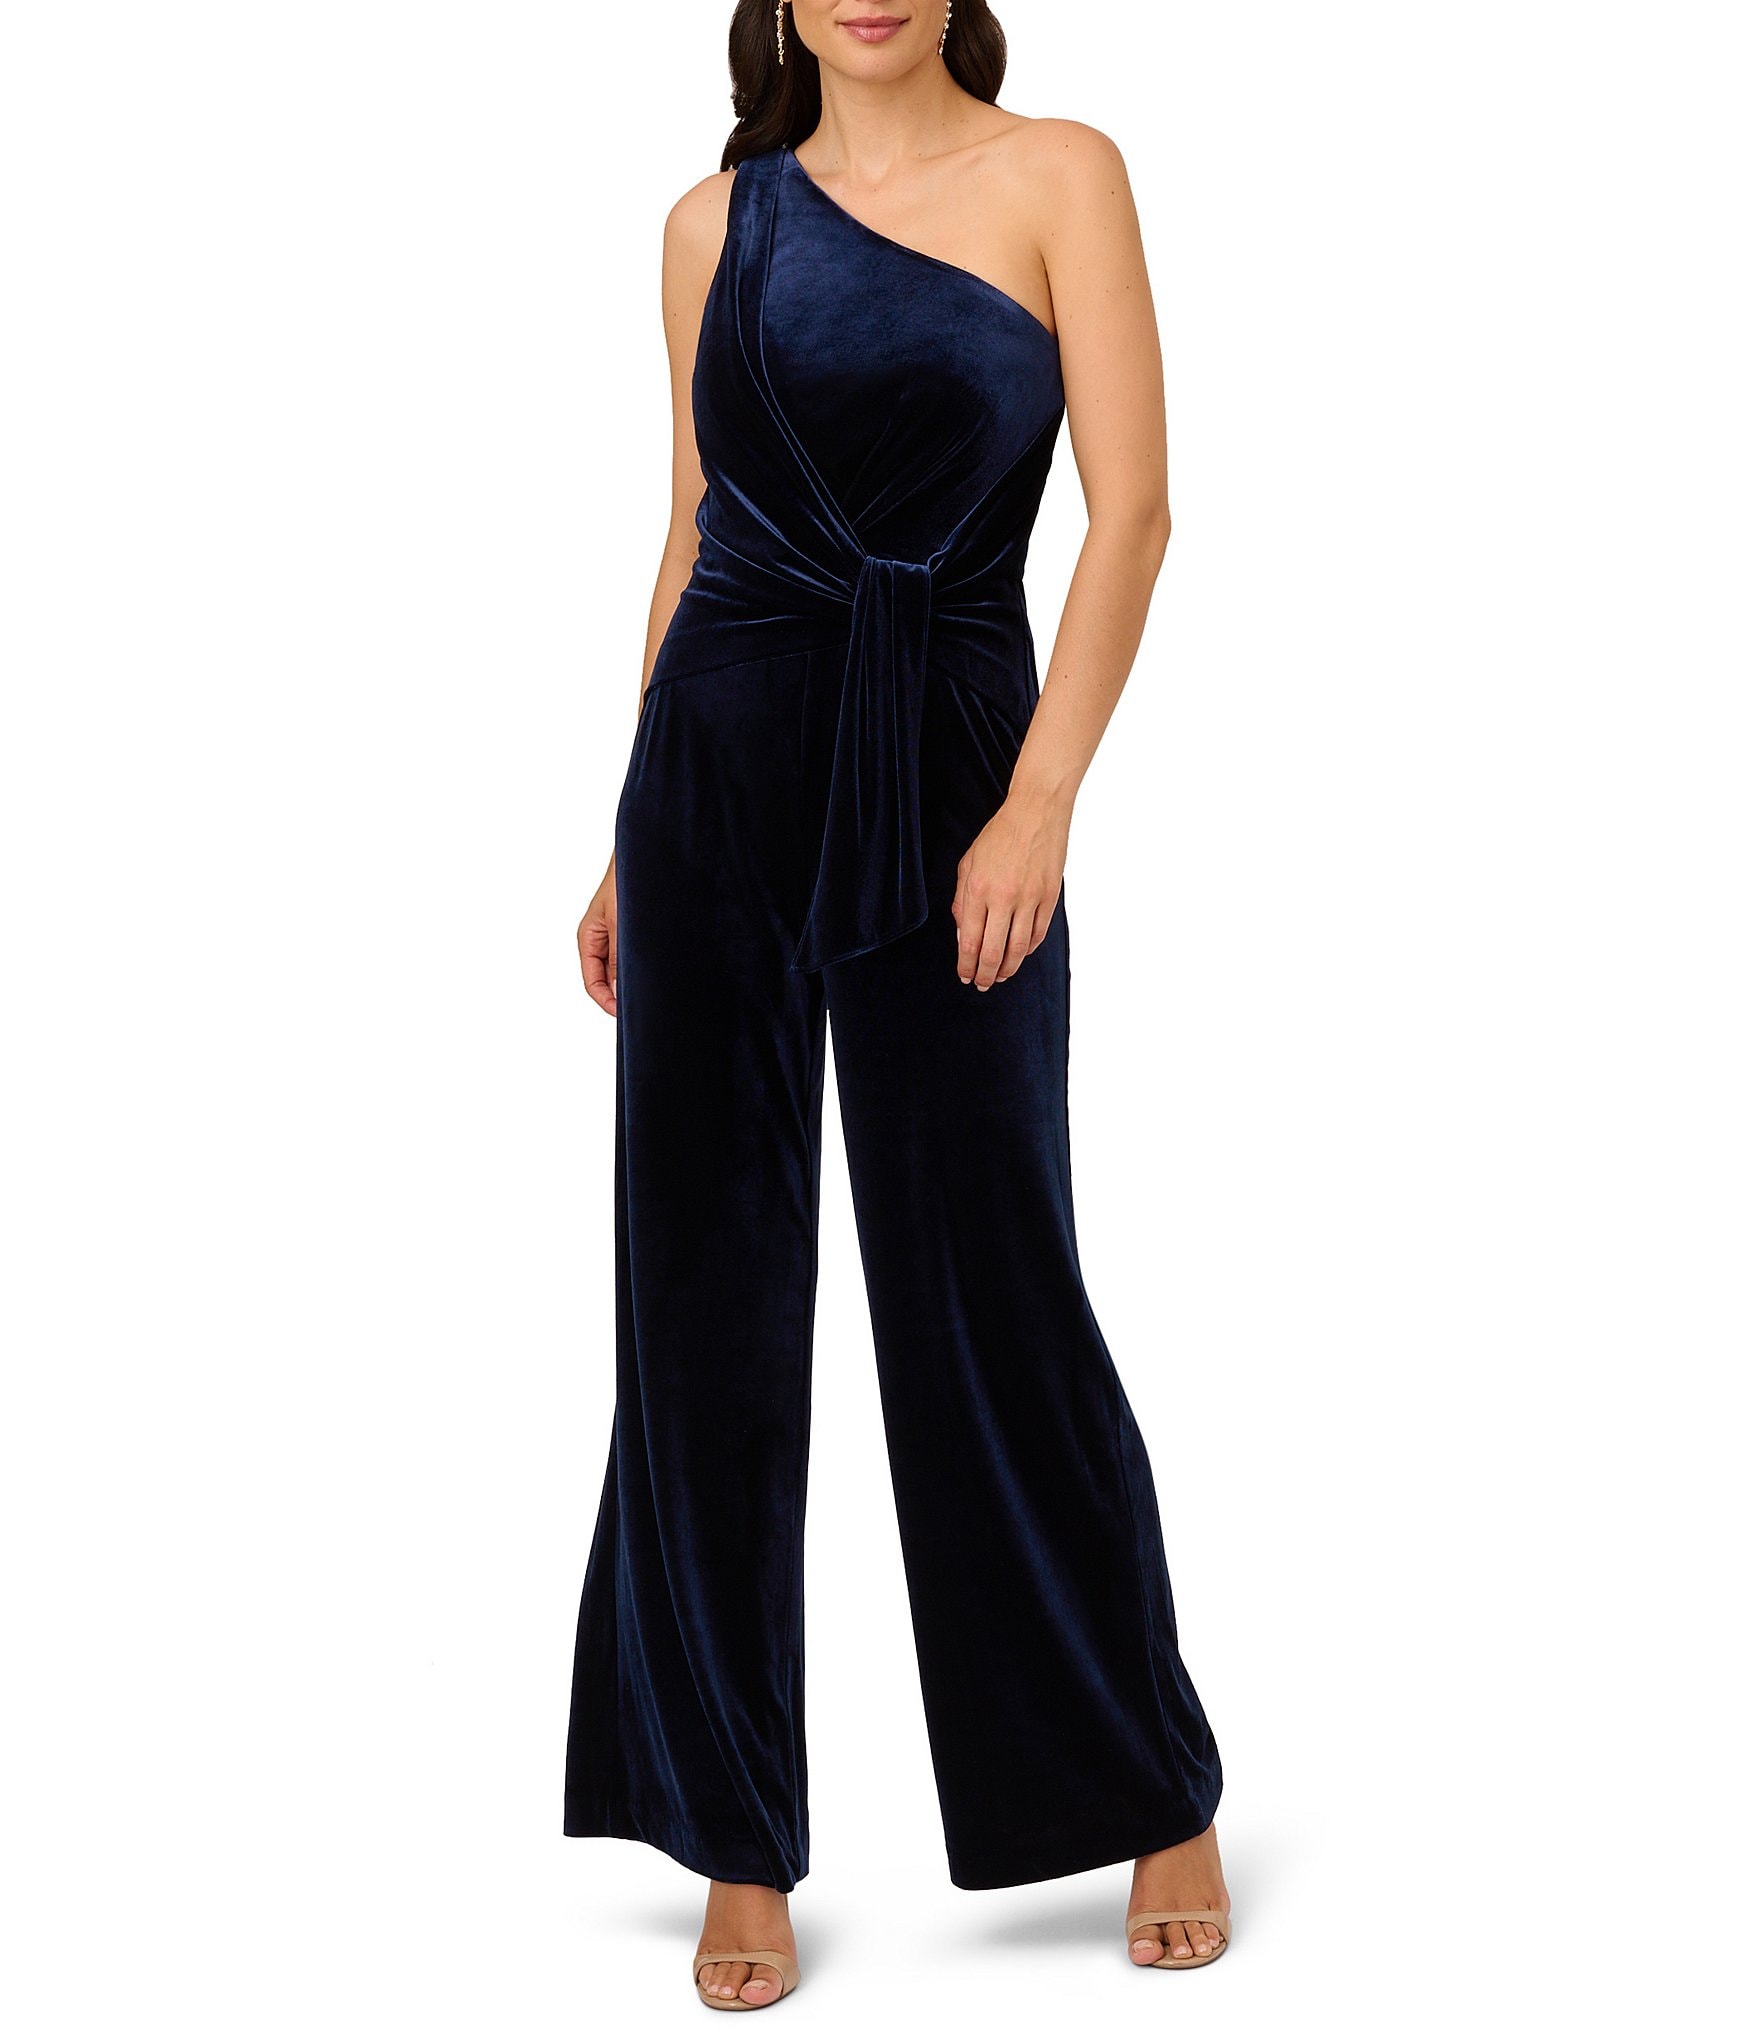 top○Rulfepy Women One Off Shoulder Long Jumpsuit Evening Party